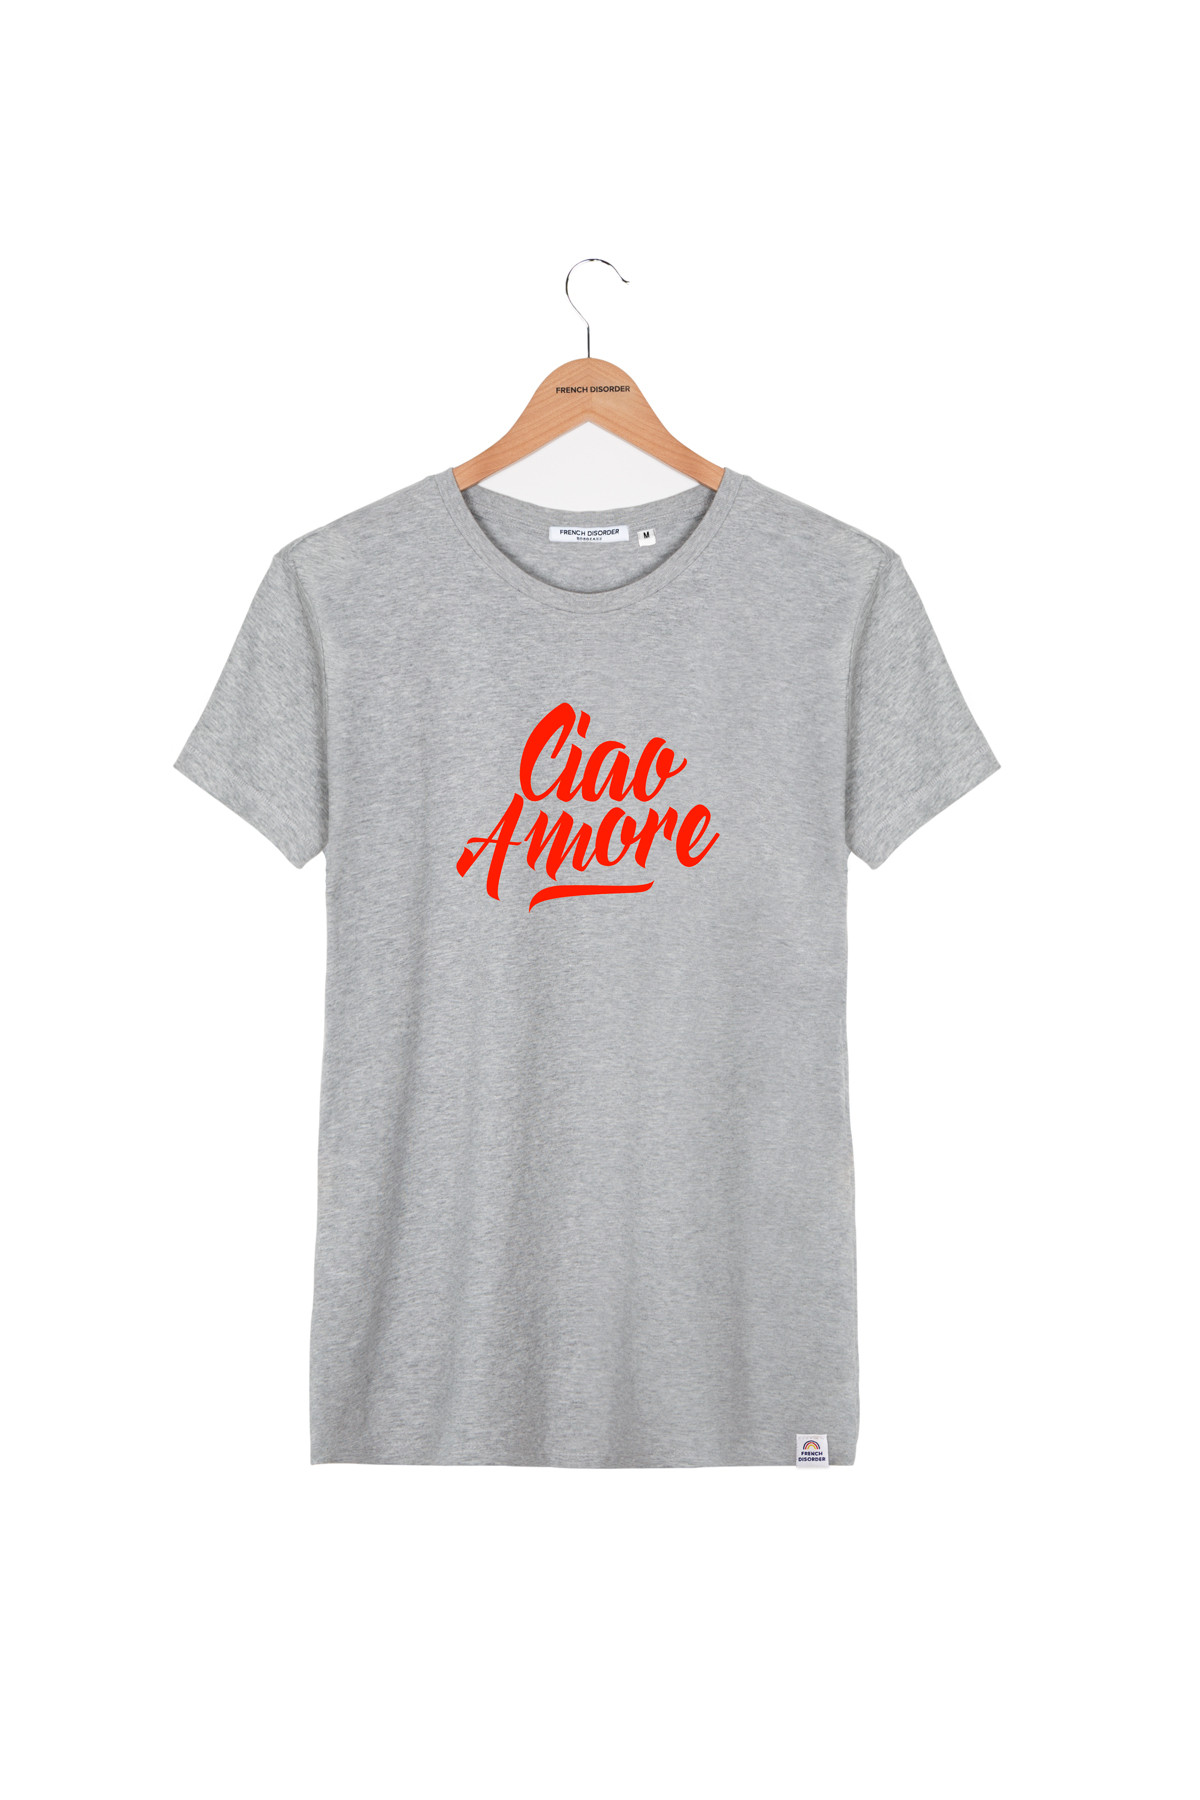 Photo de T-SHIRTS COL ROND Tshirt CIAO AMORE chez French Disorder